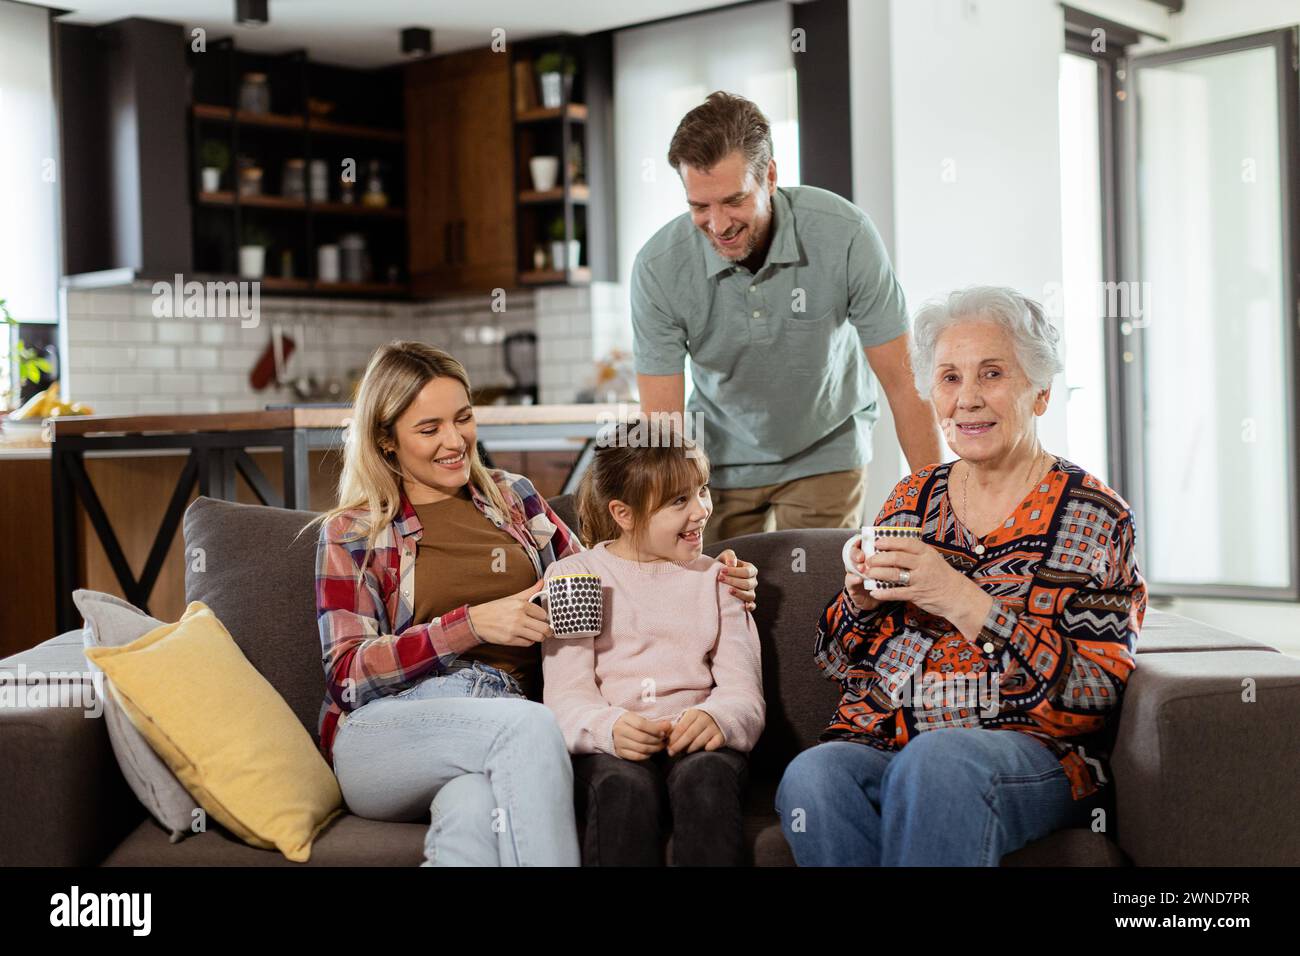 Heartwarming scene unfolds as a multi-generational family gathers on a couch to present a birthday cake to a delighted grandmother, creating memories Stock Photo